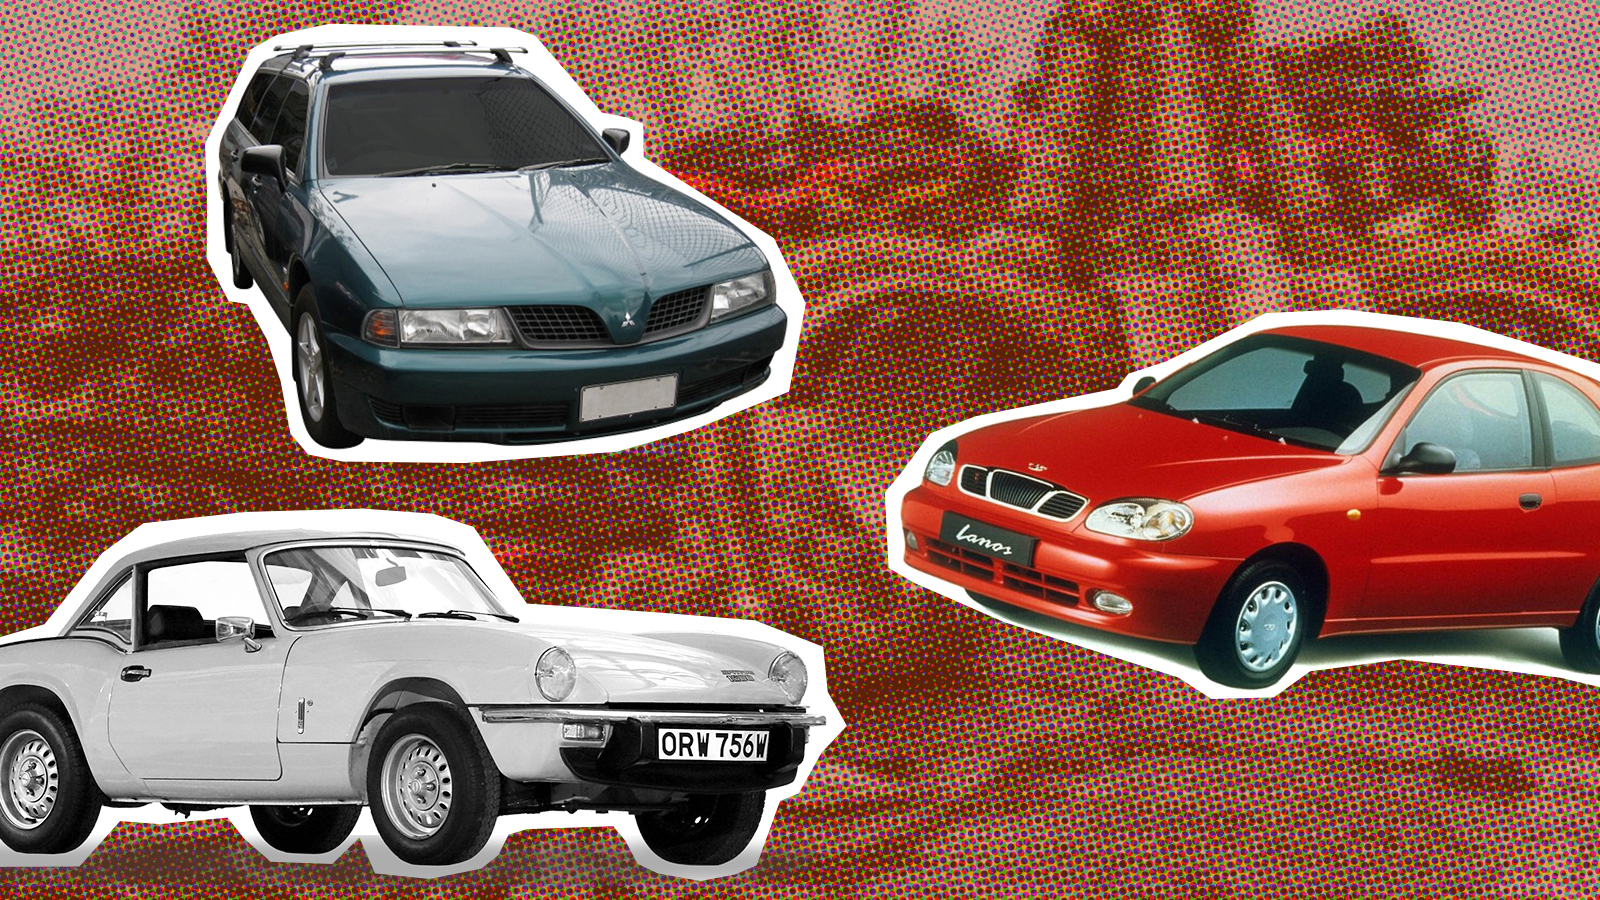 “It Just Loved Being Broken”: These Are The Worst Cars In Australia